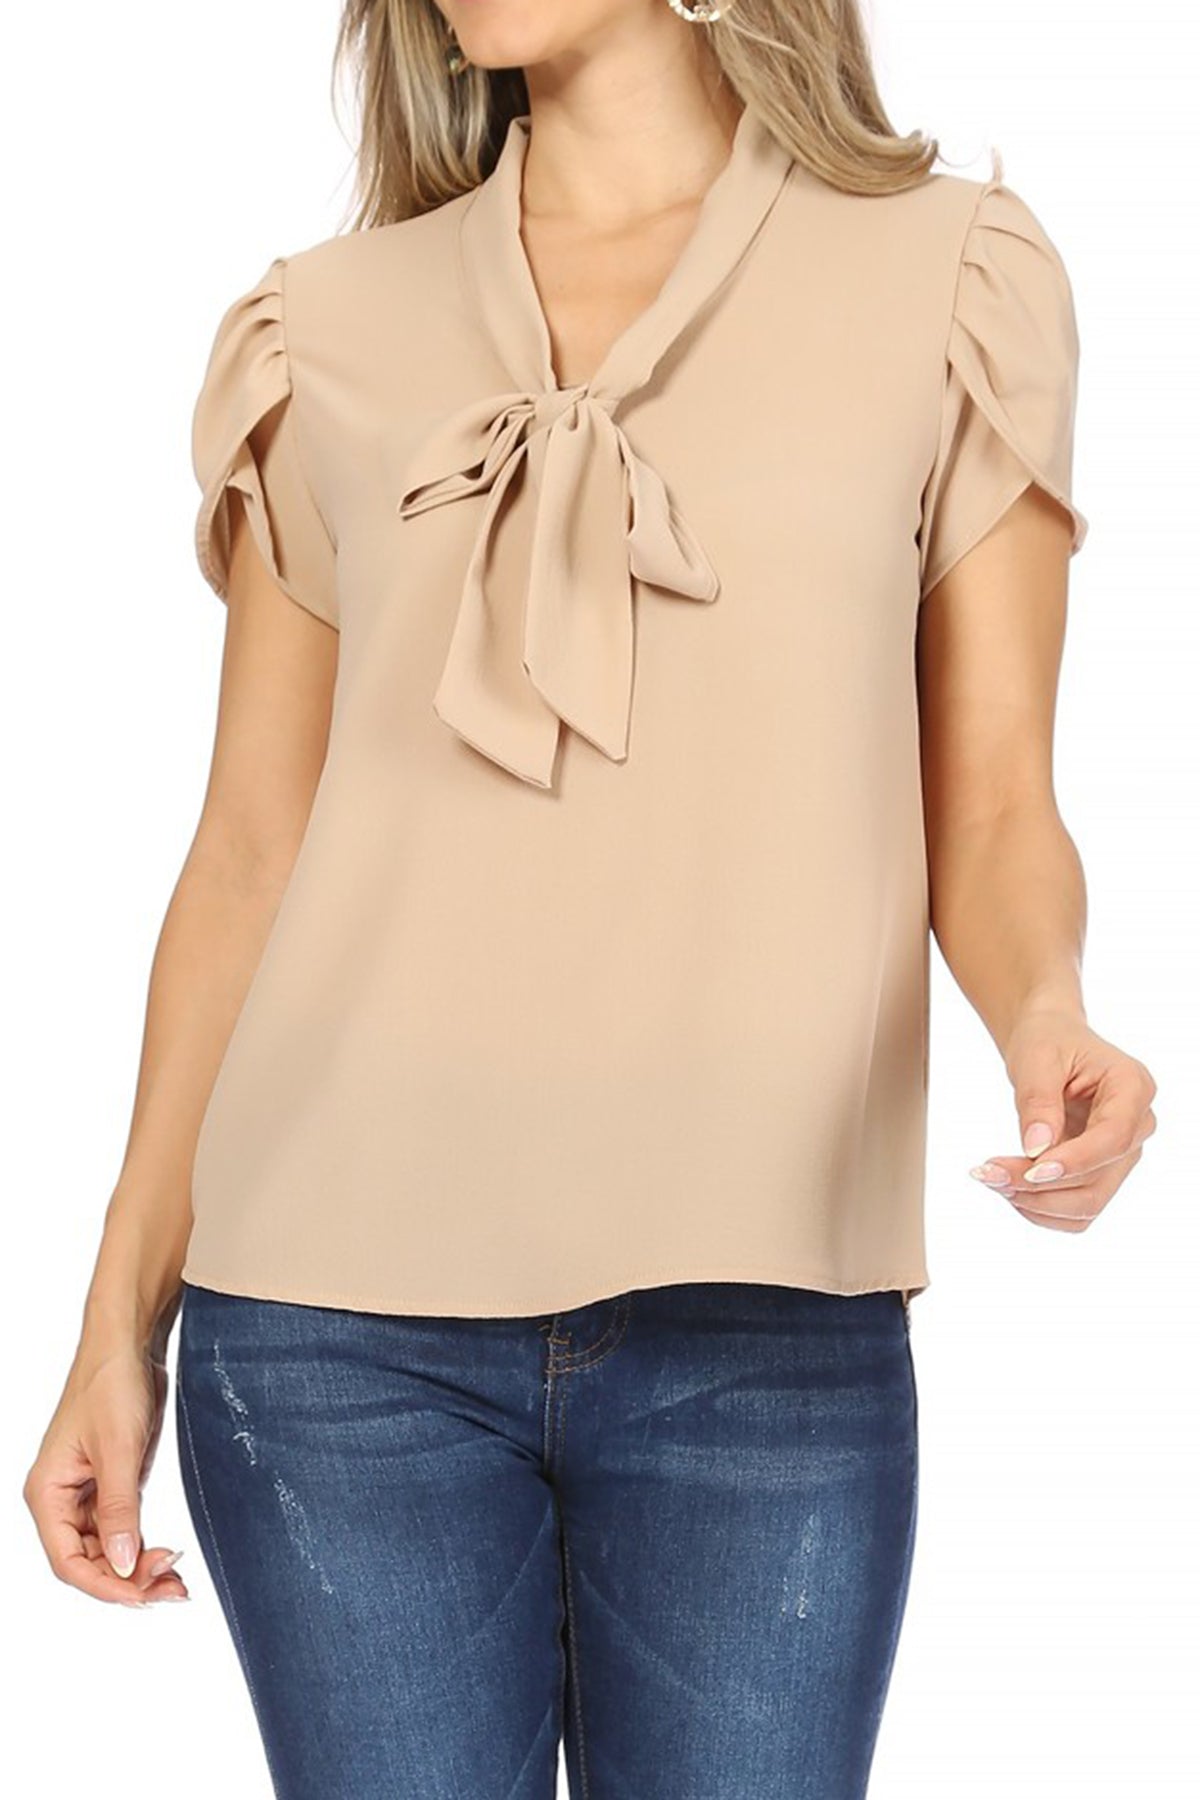 Women's Casual Solid Petal Sleeve Bow Tie Neck Short Sleeve Blouse Shirt Top